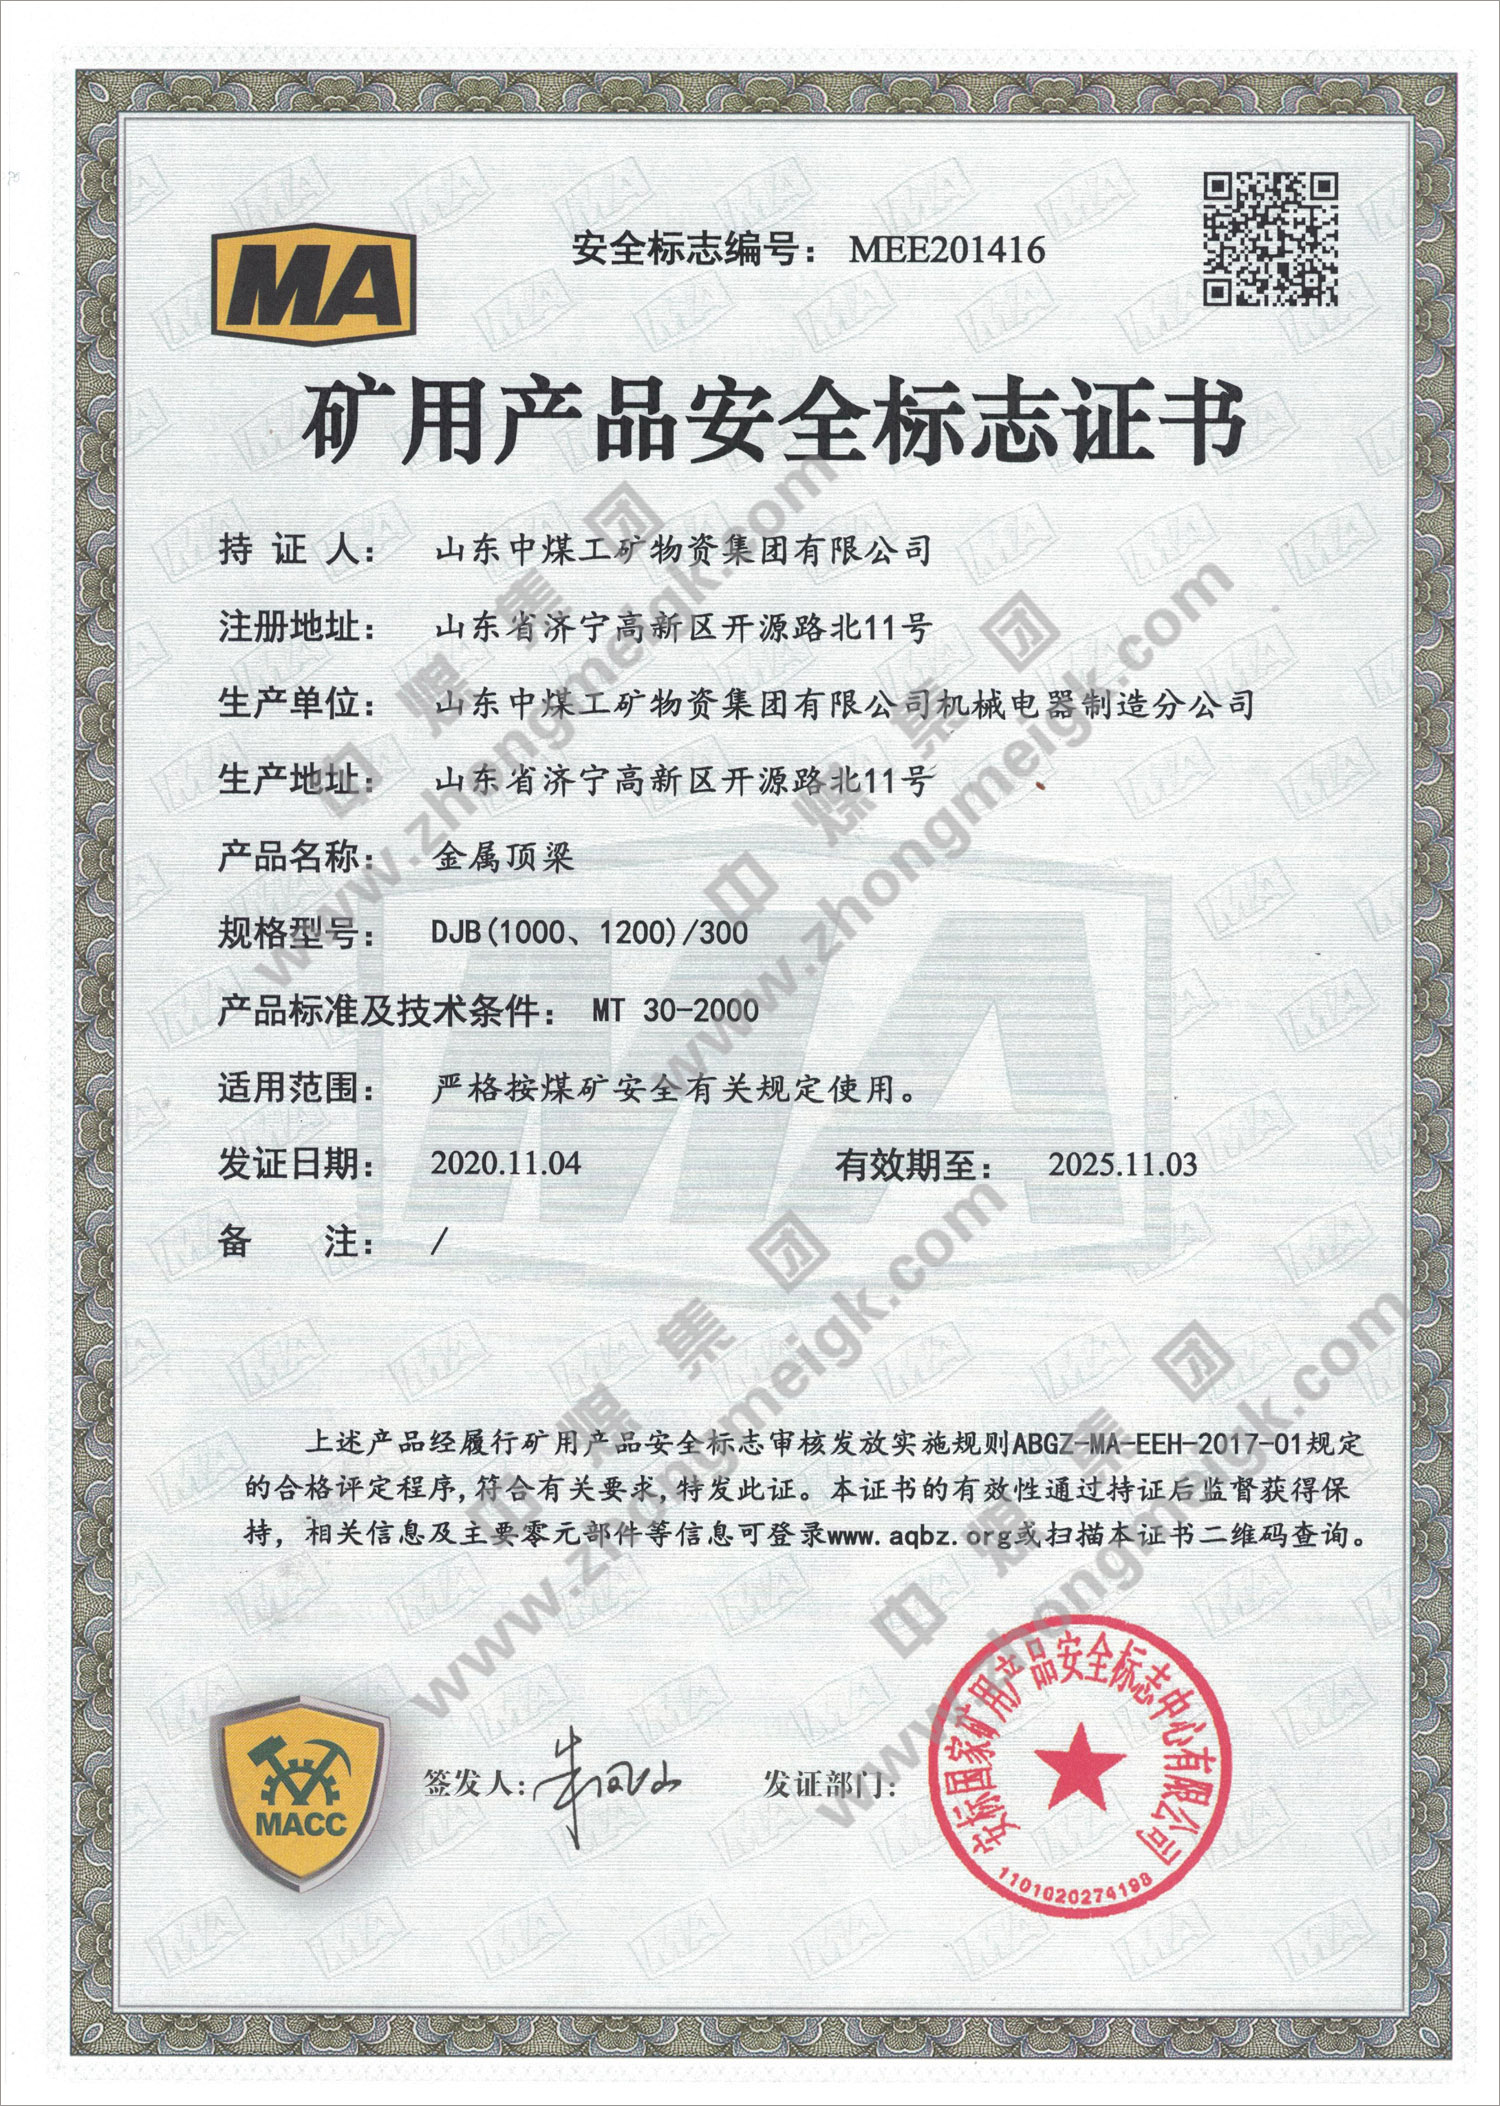 Warm Congratulations China Coal Group Metal Roof Beam Get National Mining Product Safety Mark Certificate